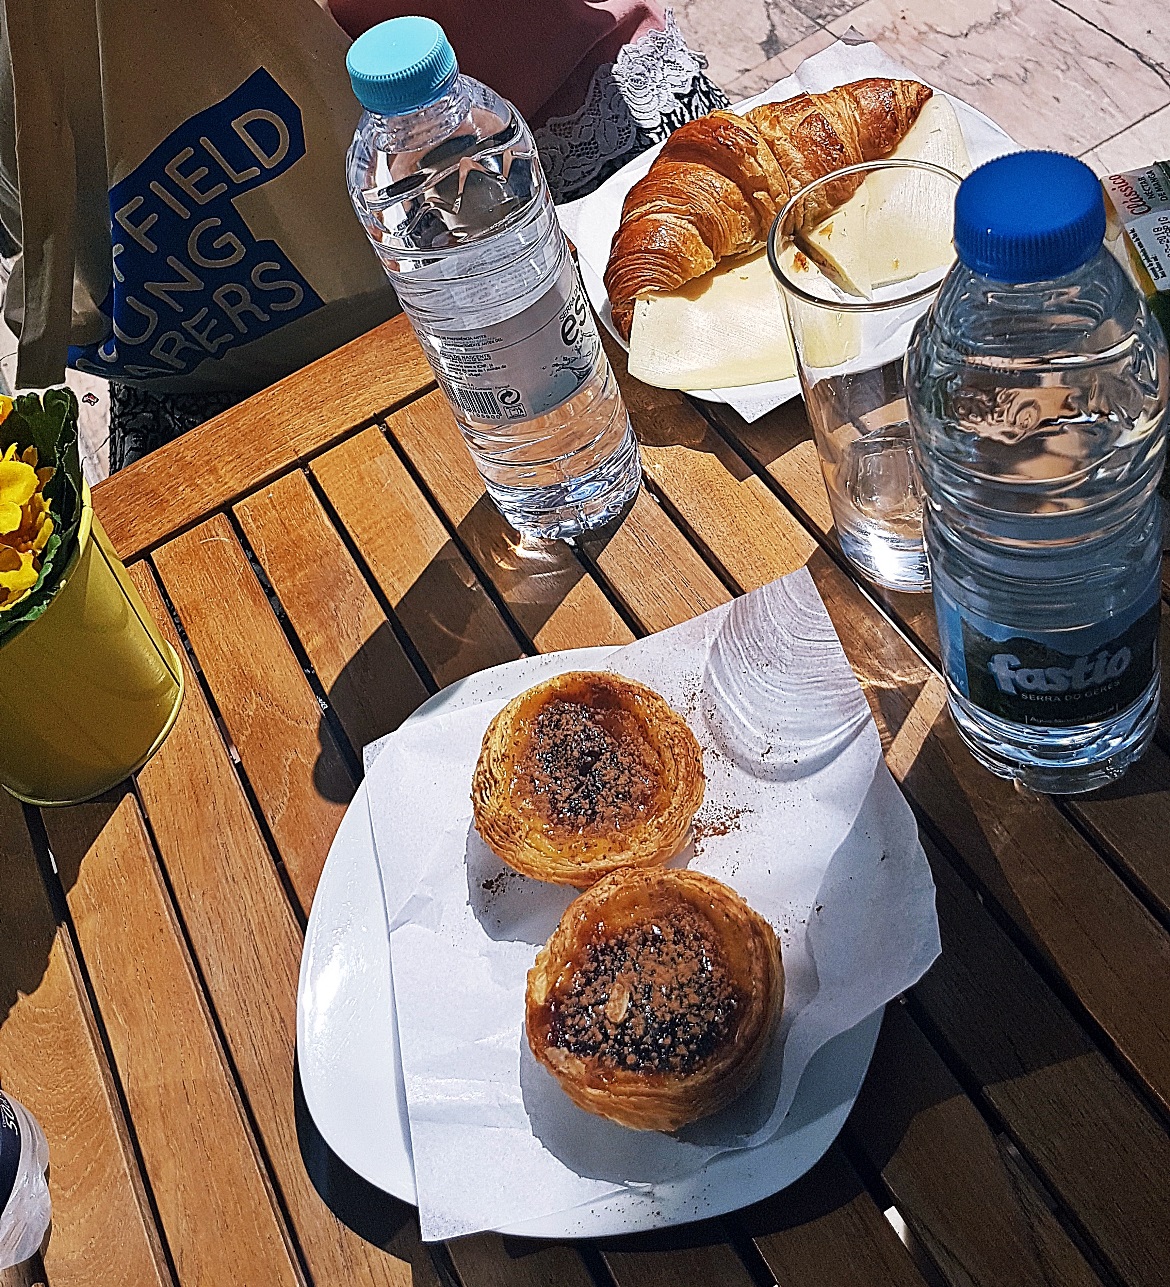 Fresh pastries at Arts Cafe - Food and Drink in Lisbon, review by BeckyBecky Blogs